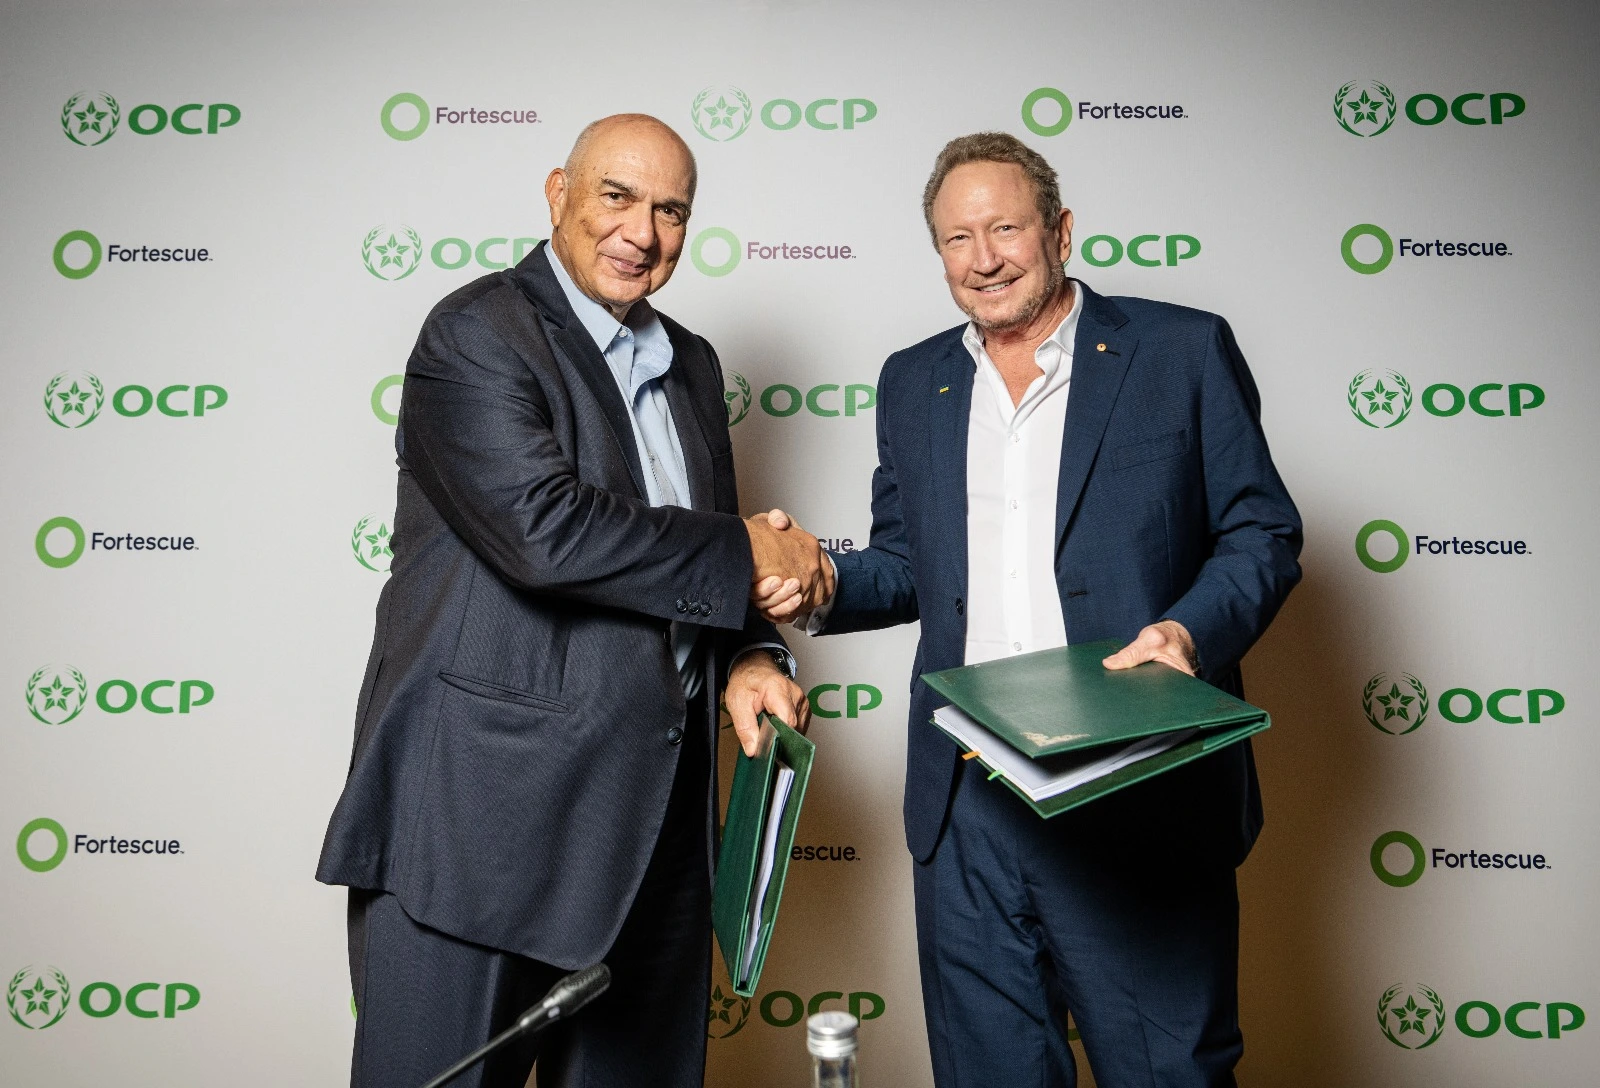 Fortescue Forms Joint Venture with OCP Group for Green Energy Projects in Morocco